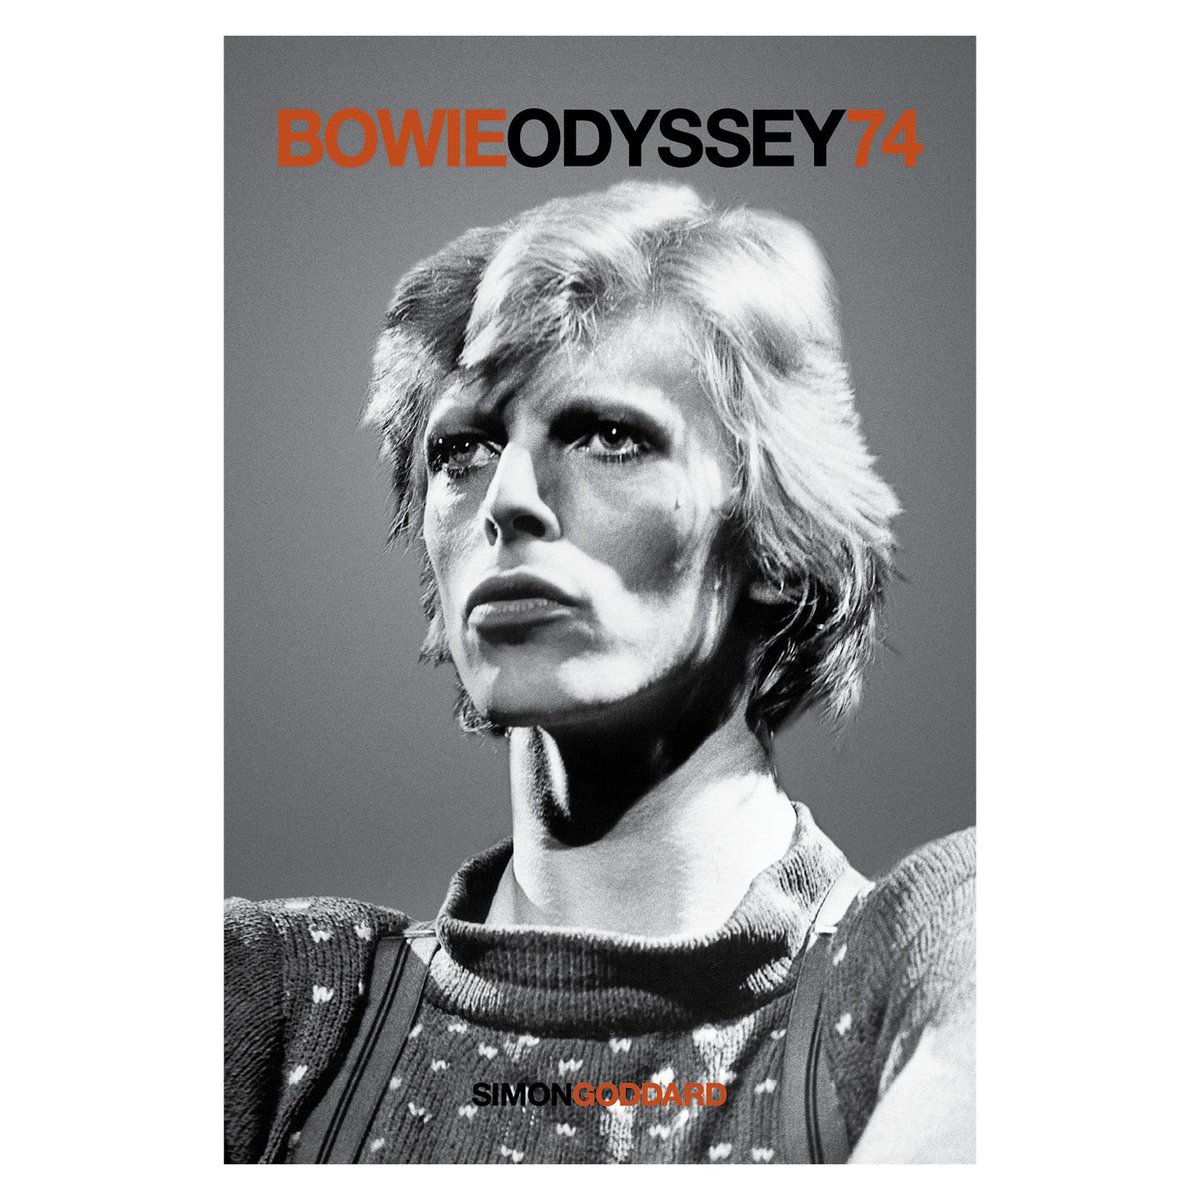 Competition reminder, only two days left to enter.. Win Copies of New Book ‘Bowie Odyssey 74’ by Simon Goddard. First prize wins all 5 books in this brilliant series. davidbowienews.com/2024/04/win-co…